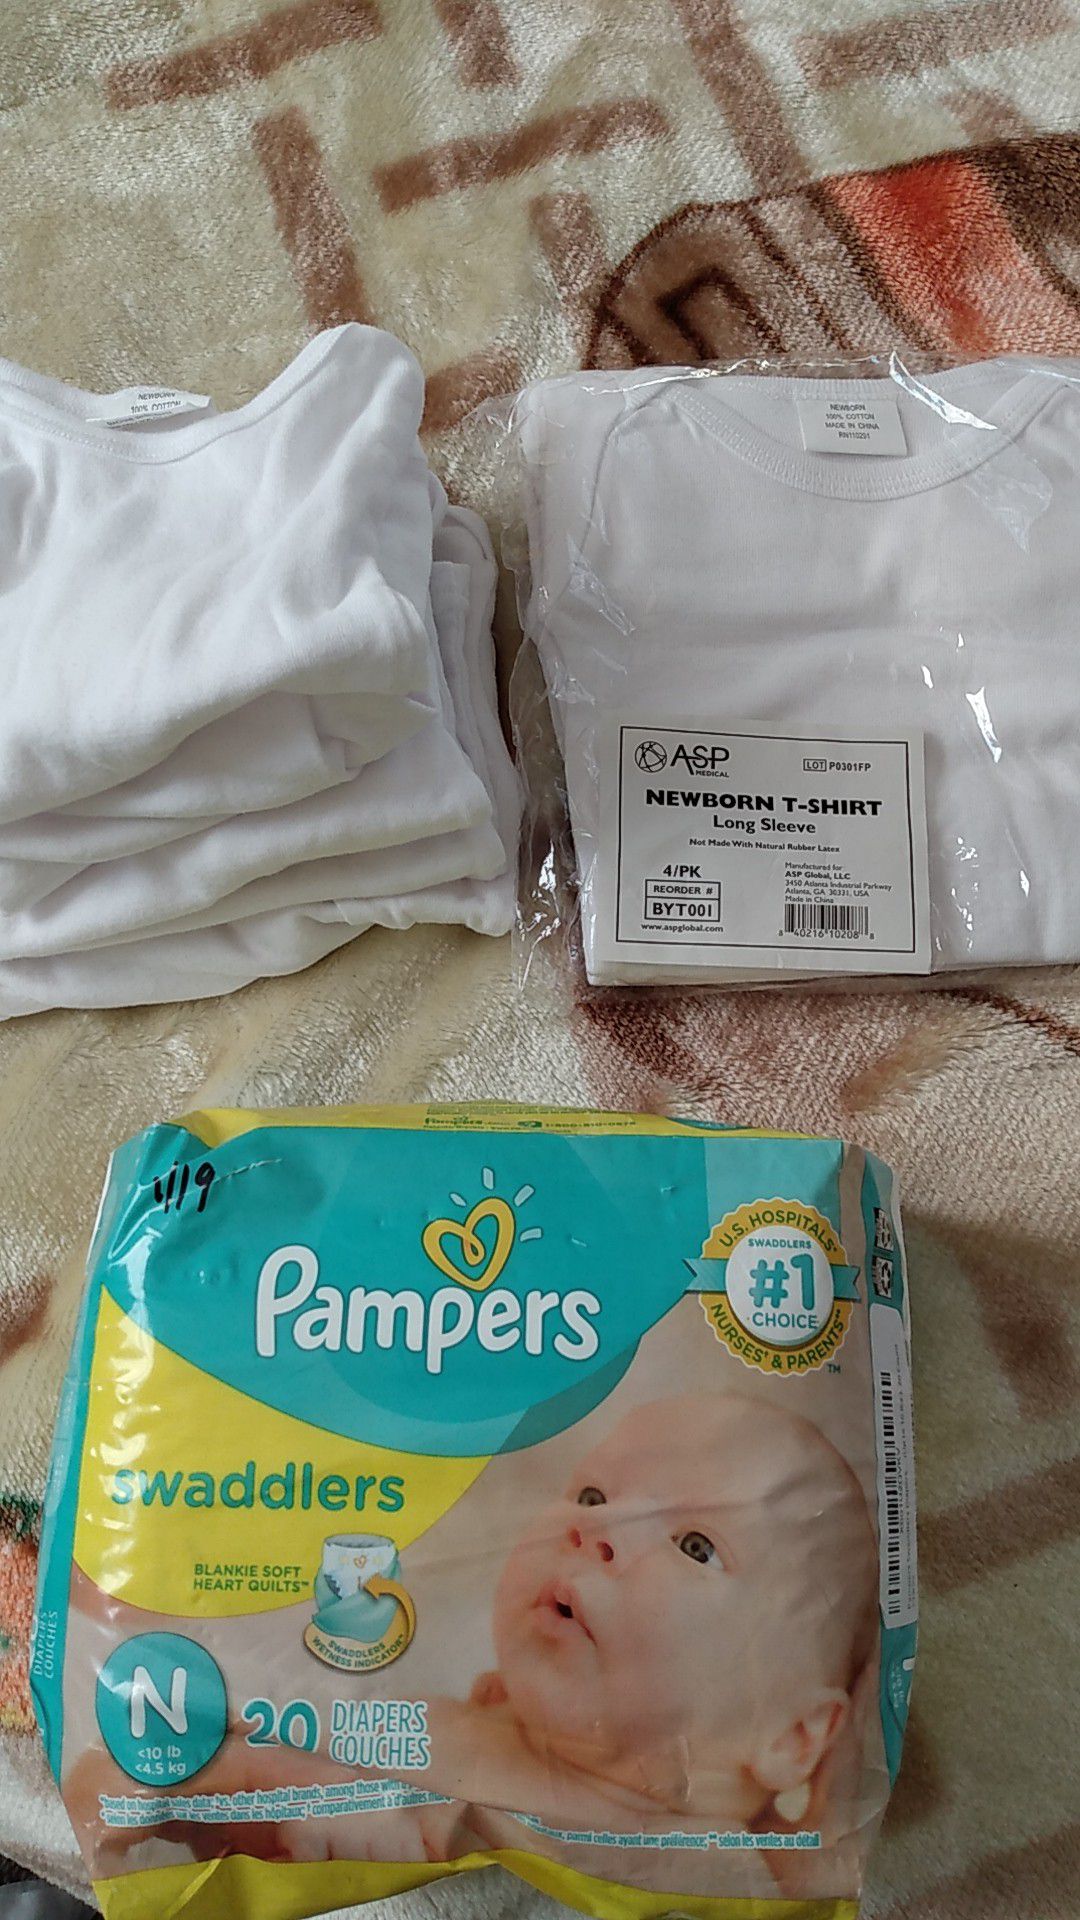 Newborn 4 pack long sleeve t-shirt and Newborn swaddlers Pampers